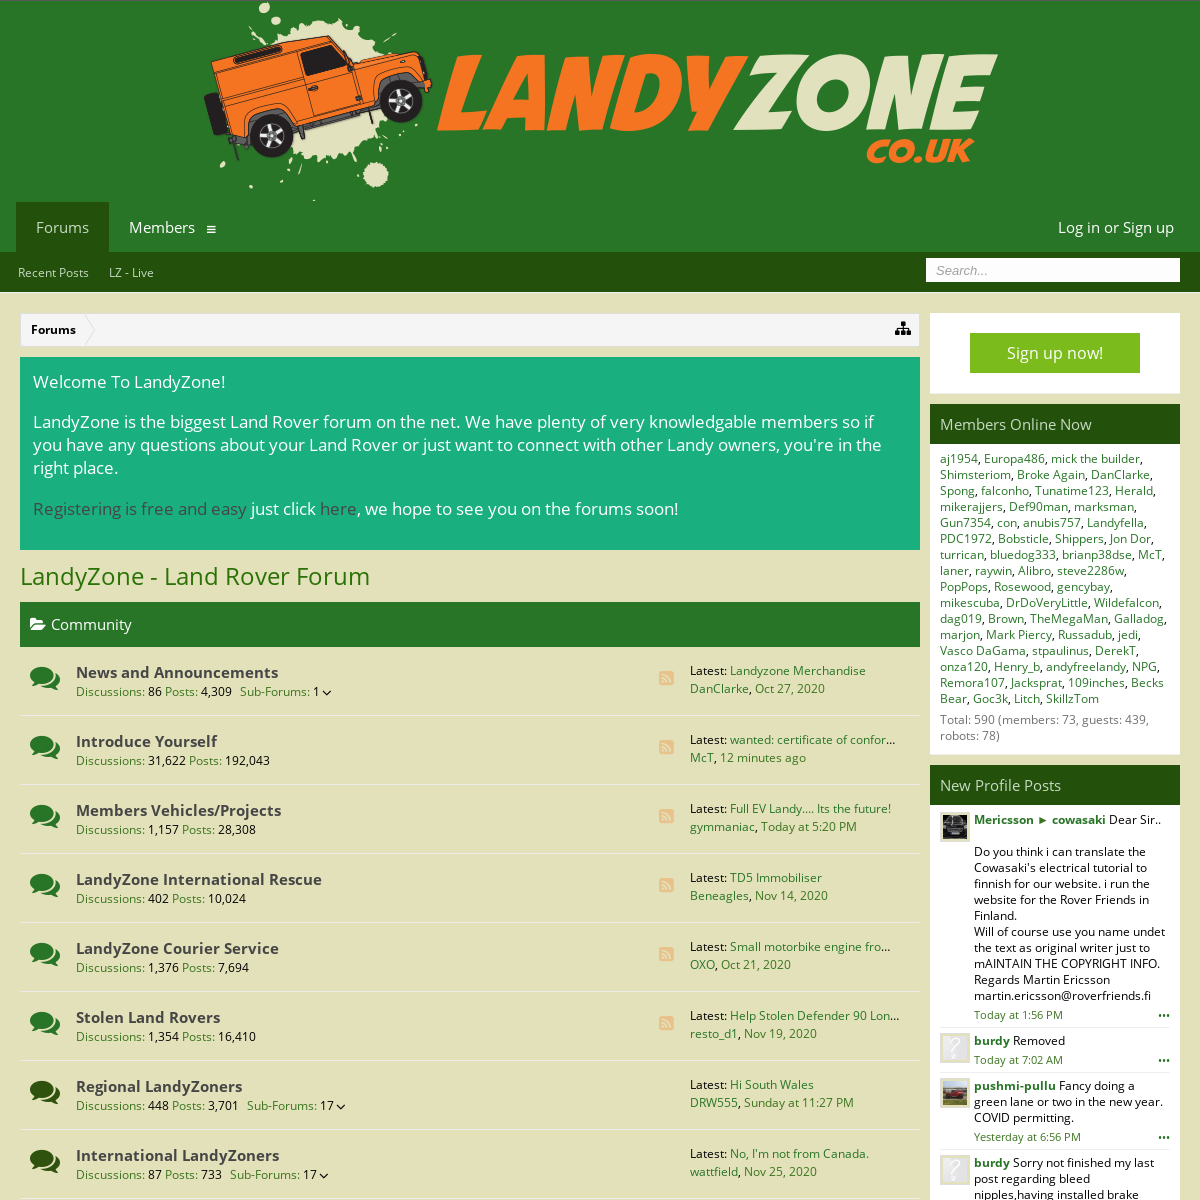 A complete backup of landyzone.co.uk